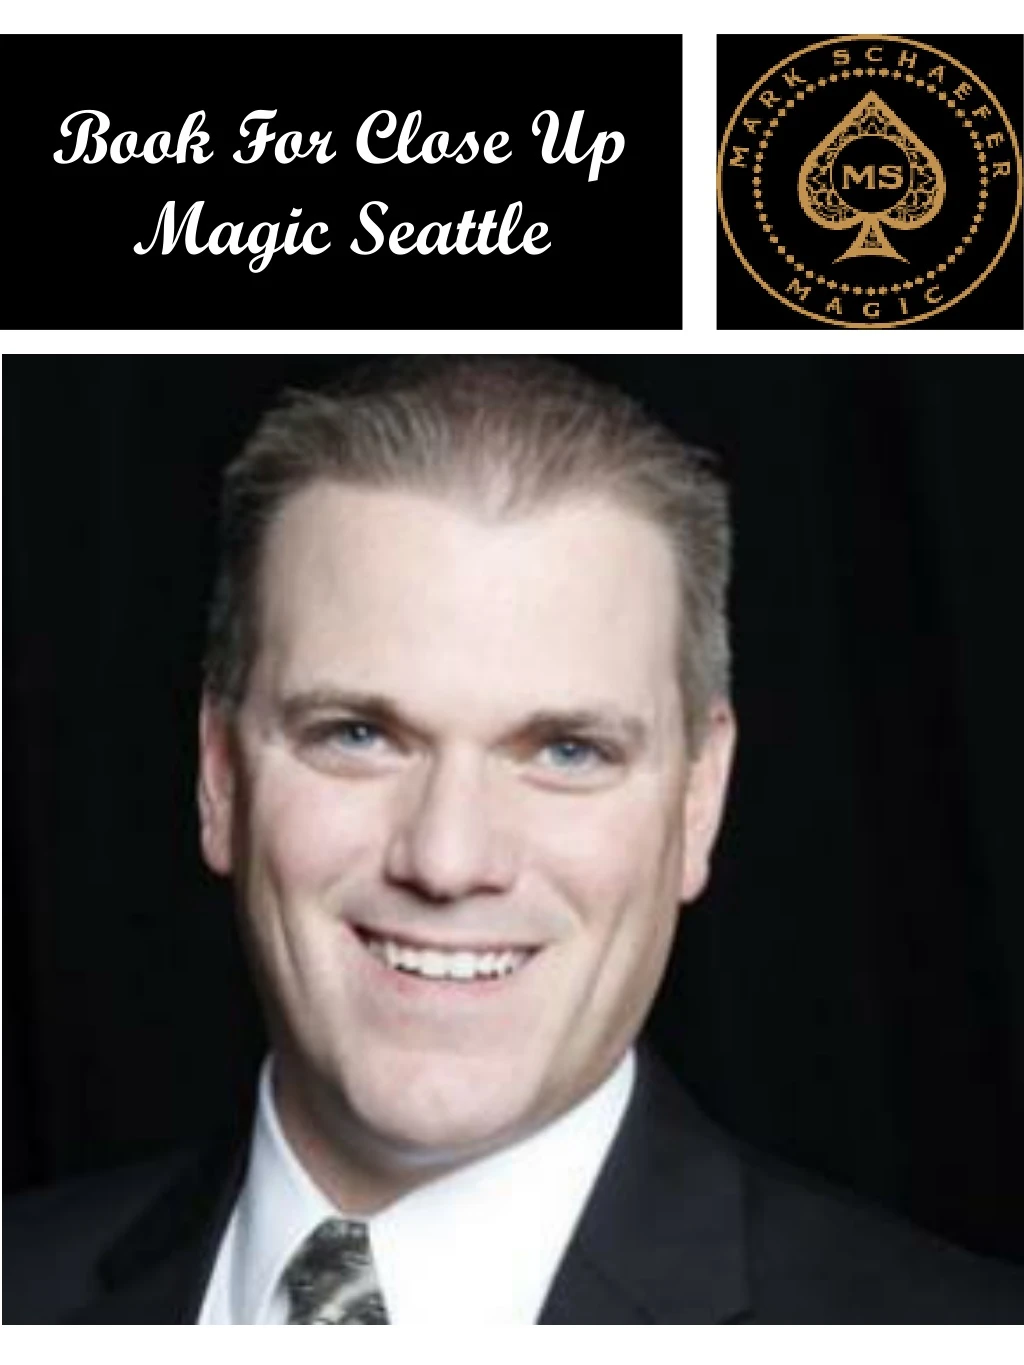 book for close up magic seattle